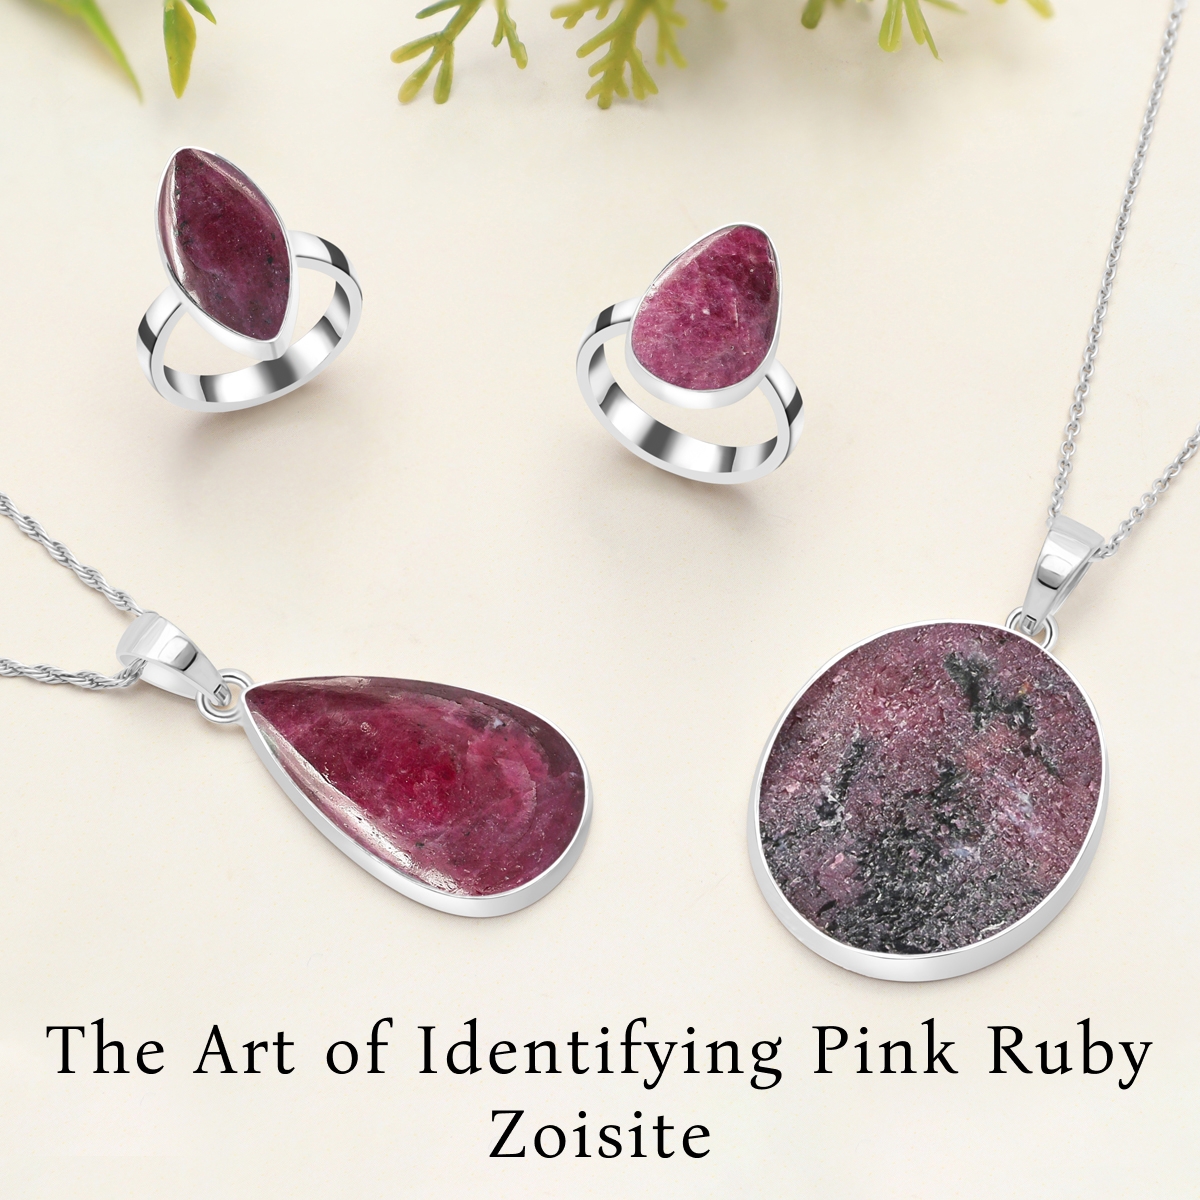 How To Tell That The Pink Ruby Zoisite You Are Buying Is Genuine?